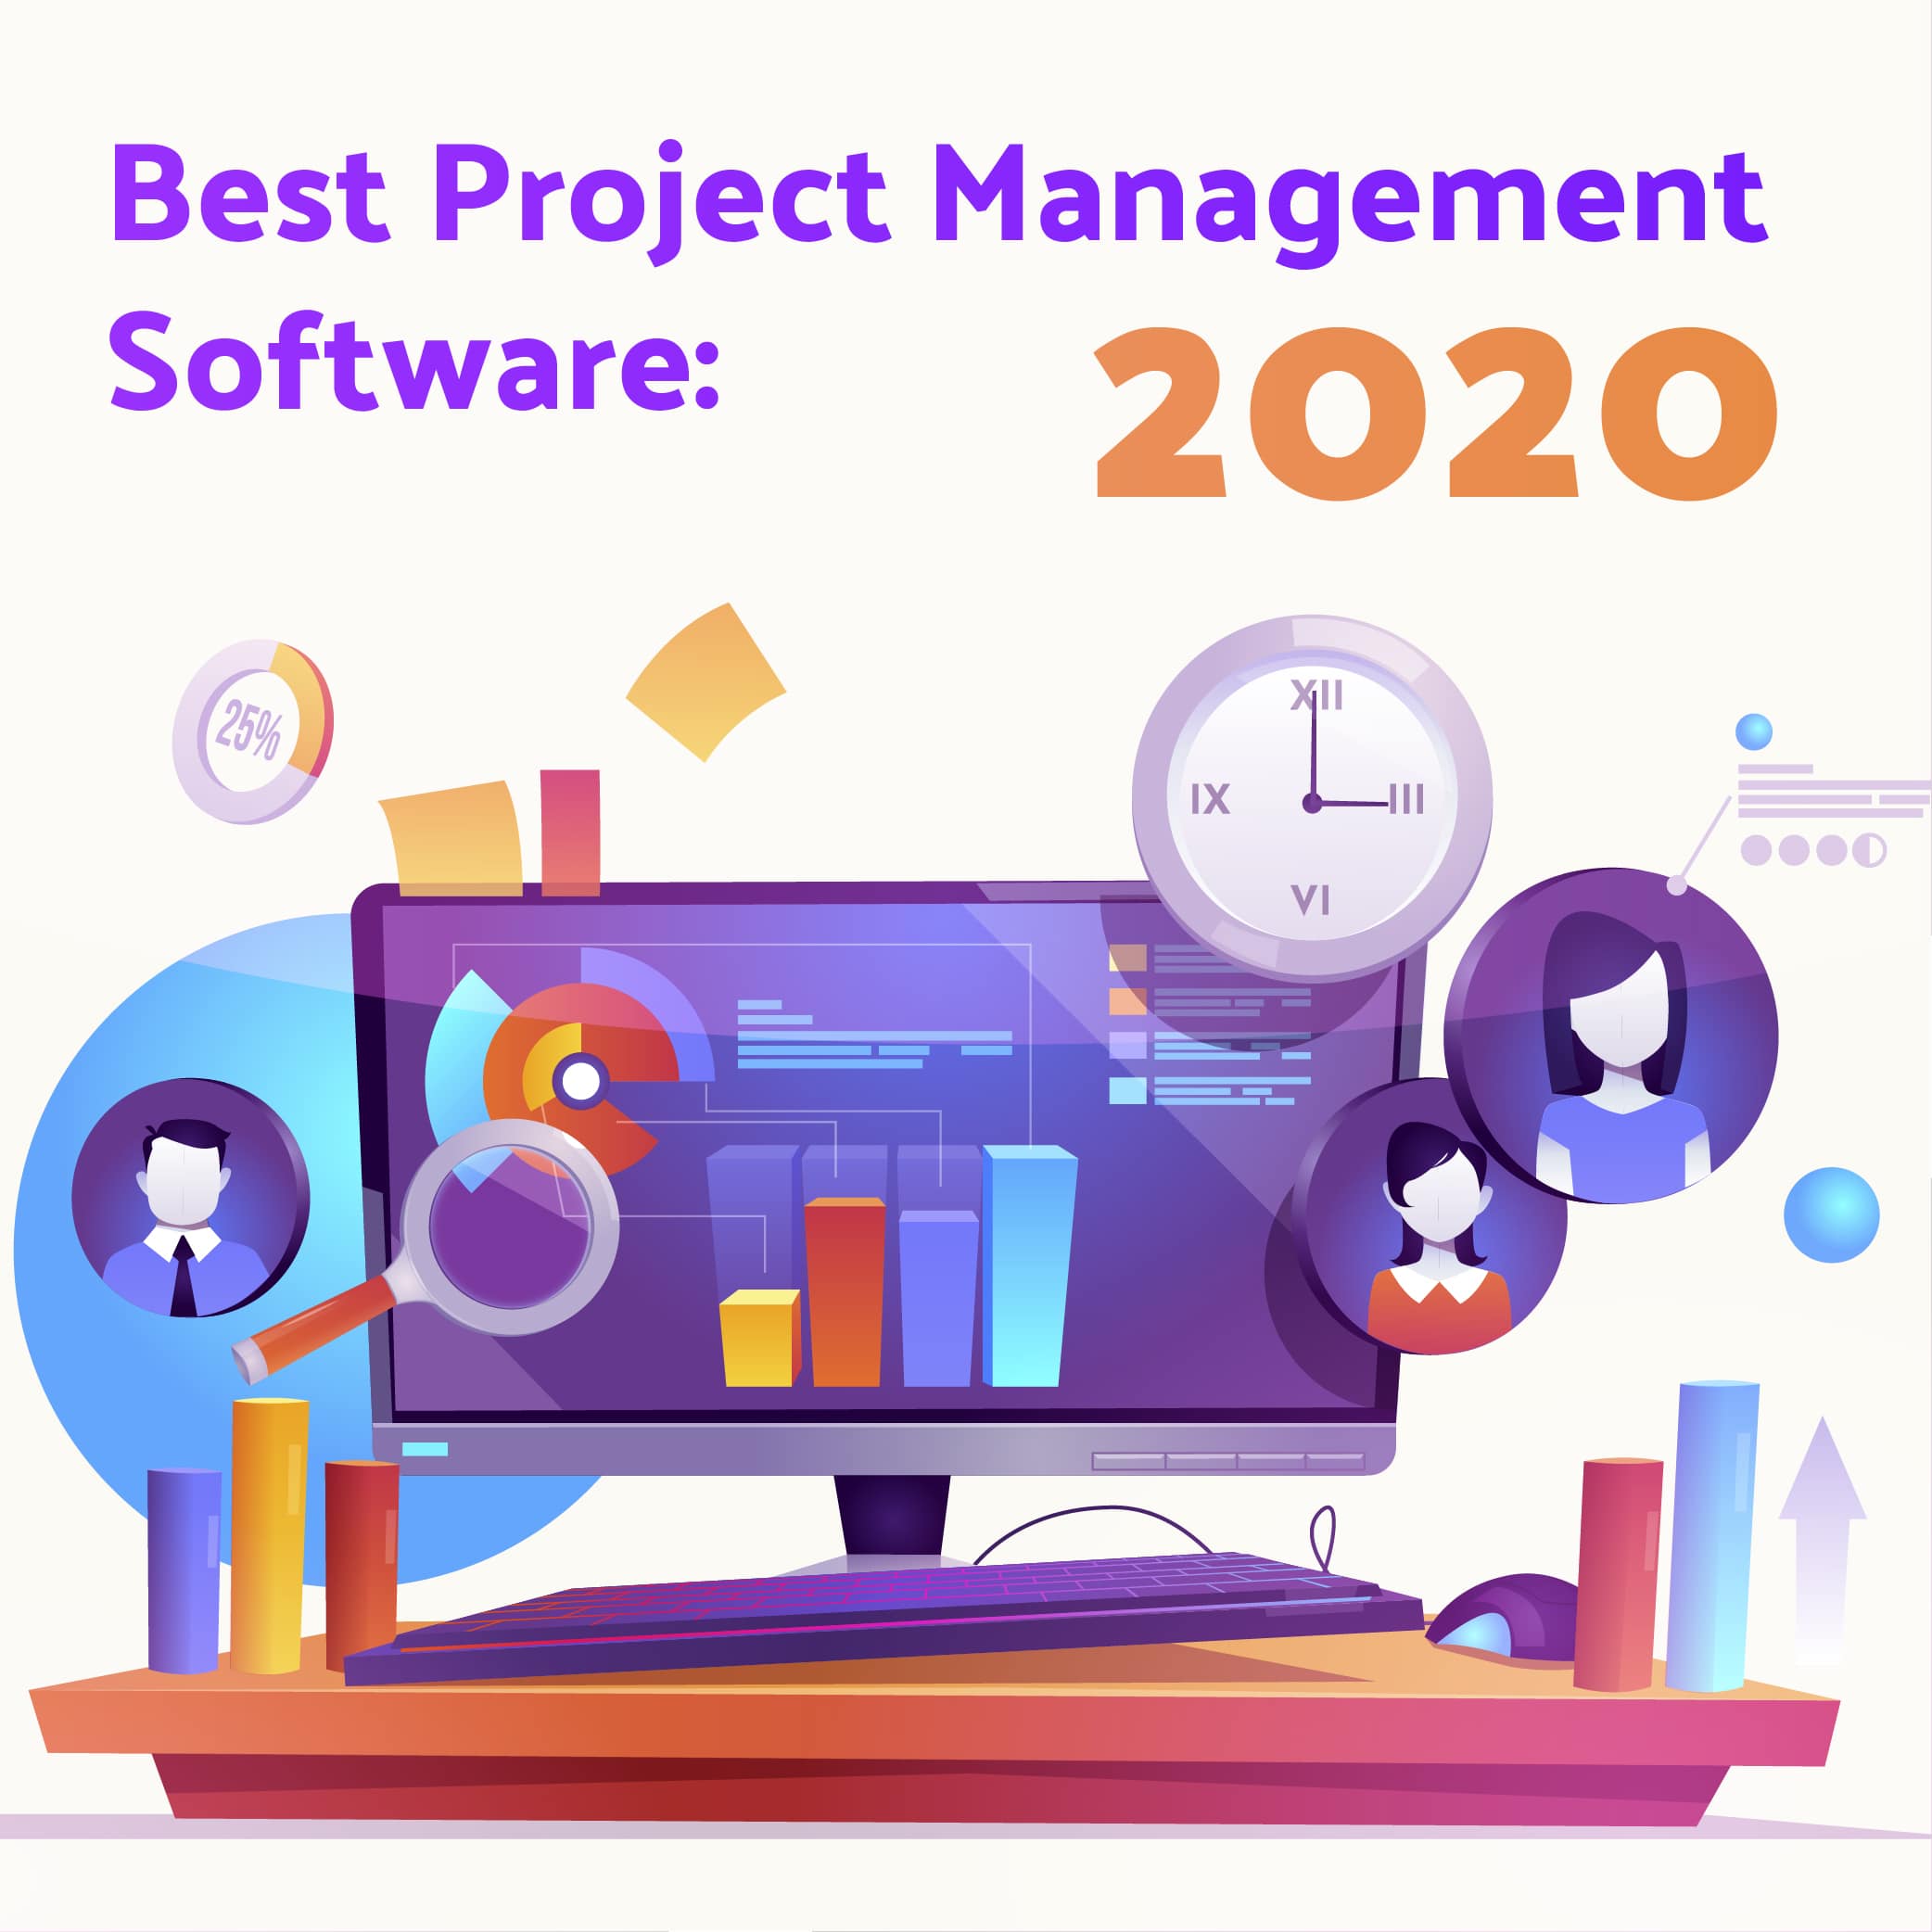 52539Best Project Management Software For Your Business In 2020